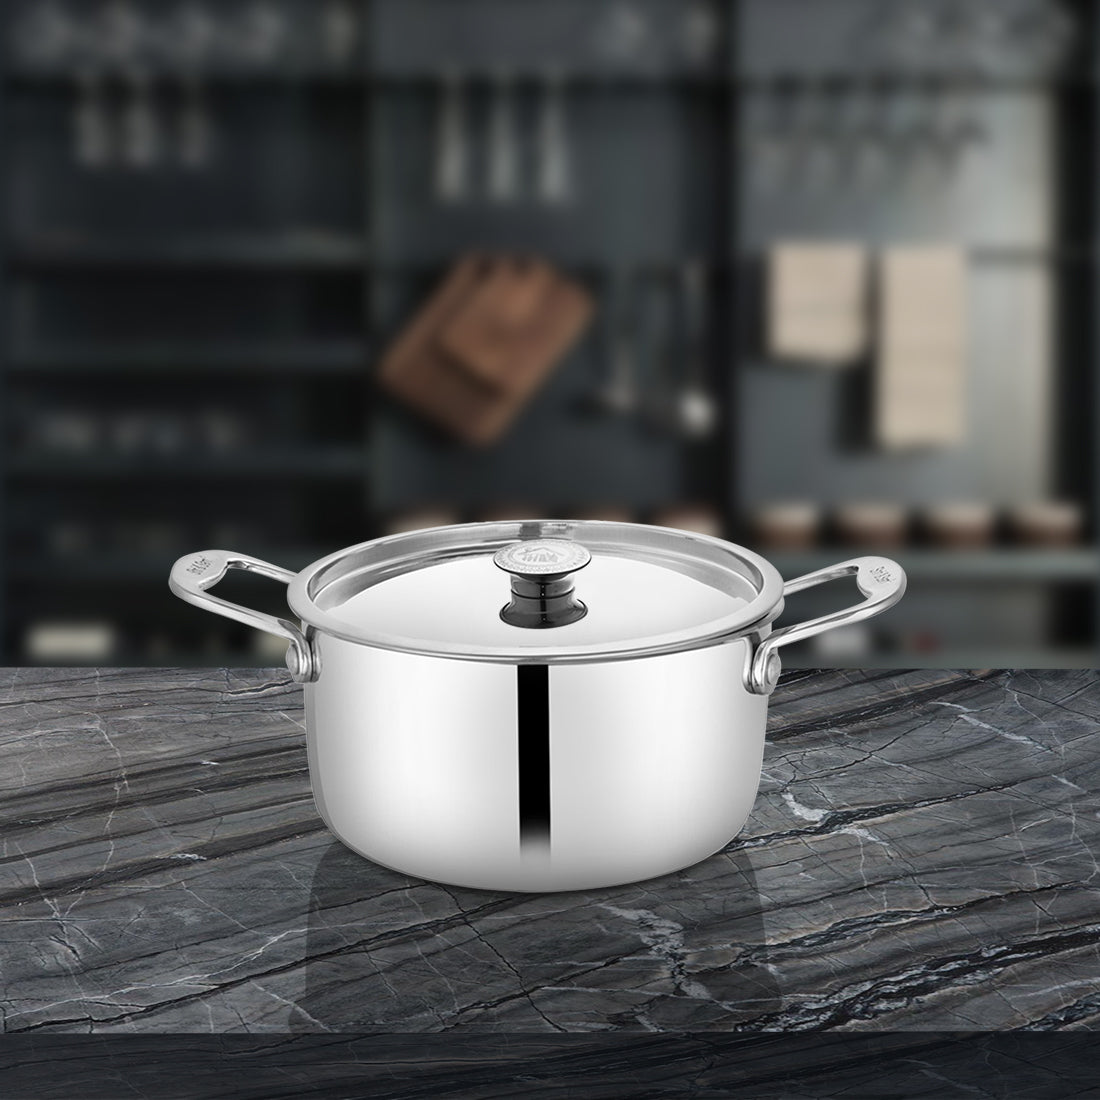 Stainless Steel Heavy Weight Casserole with SS Lid Platinum